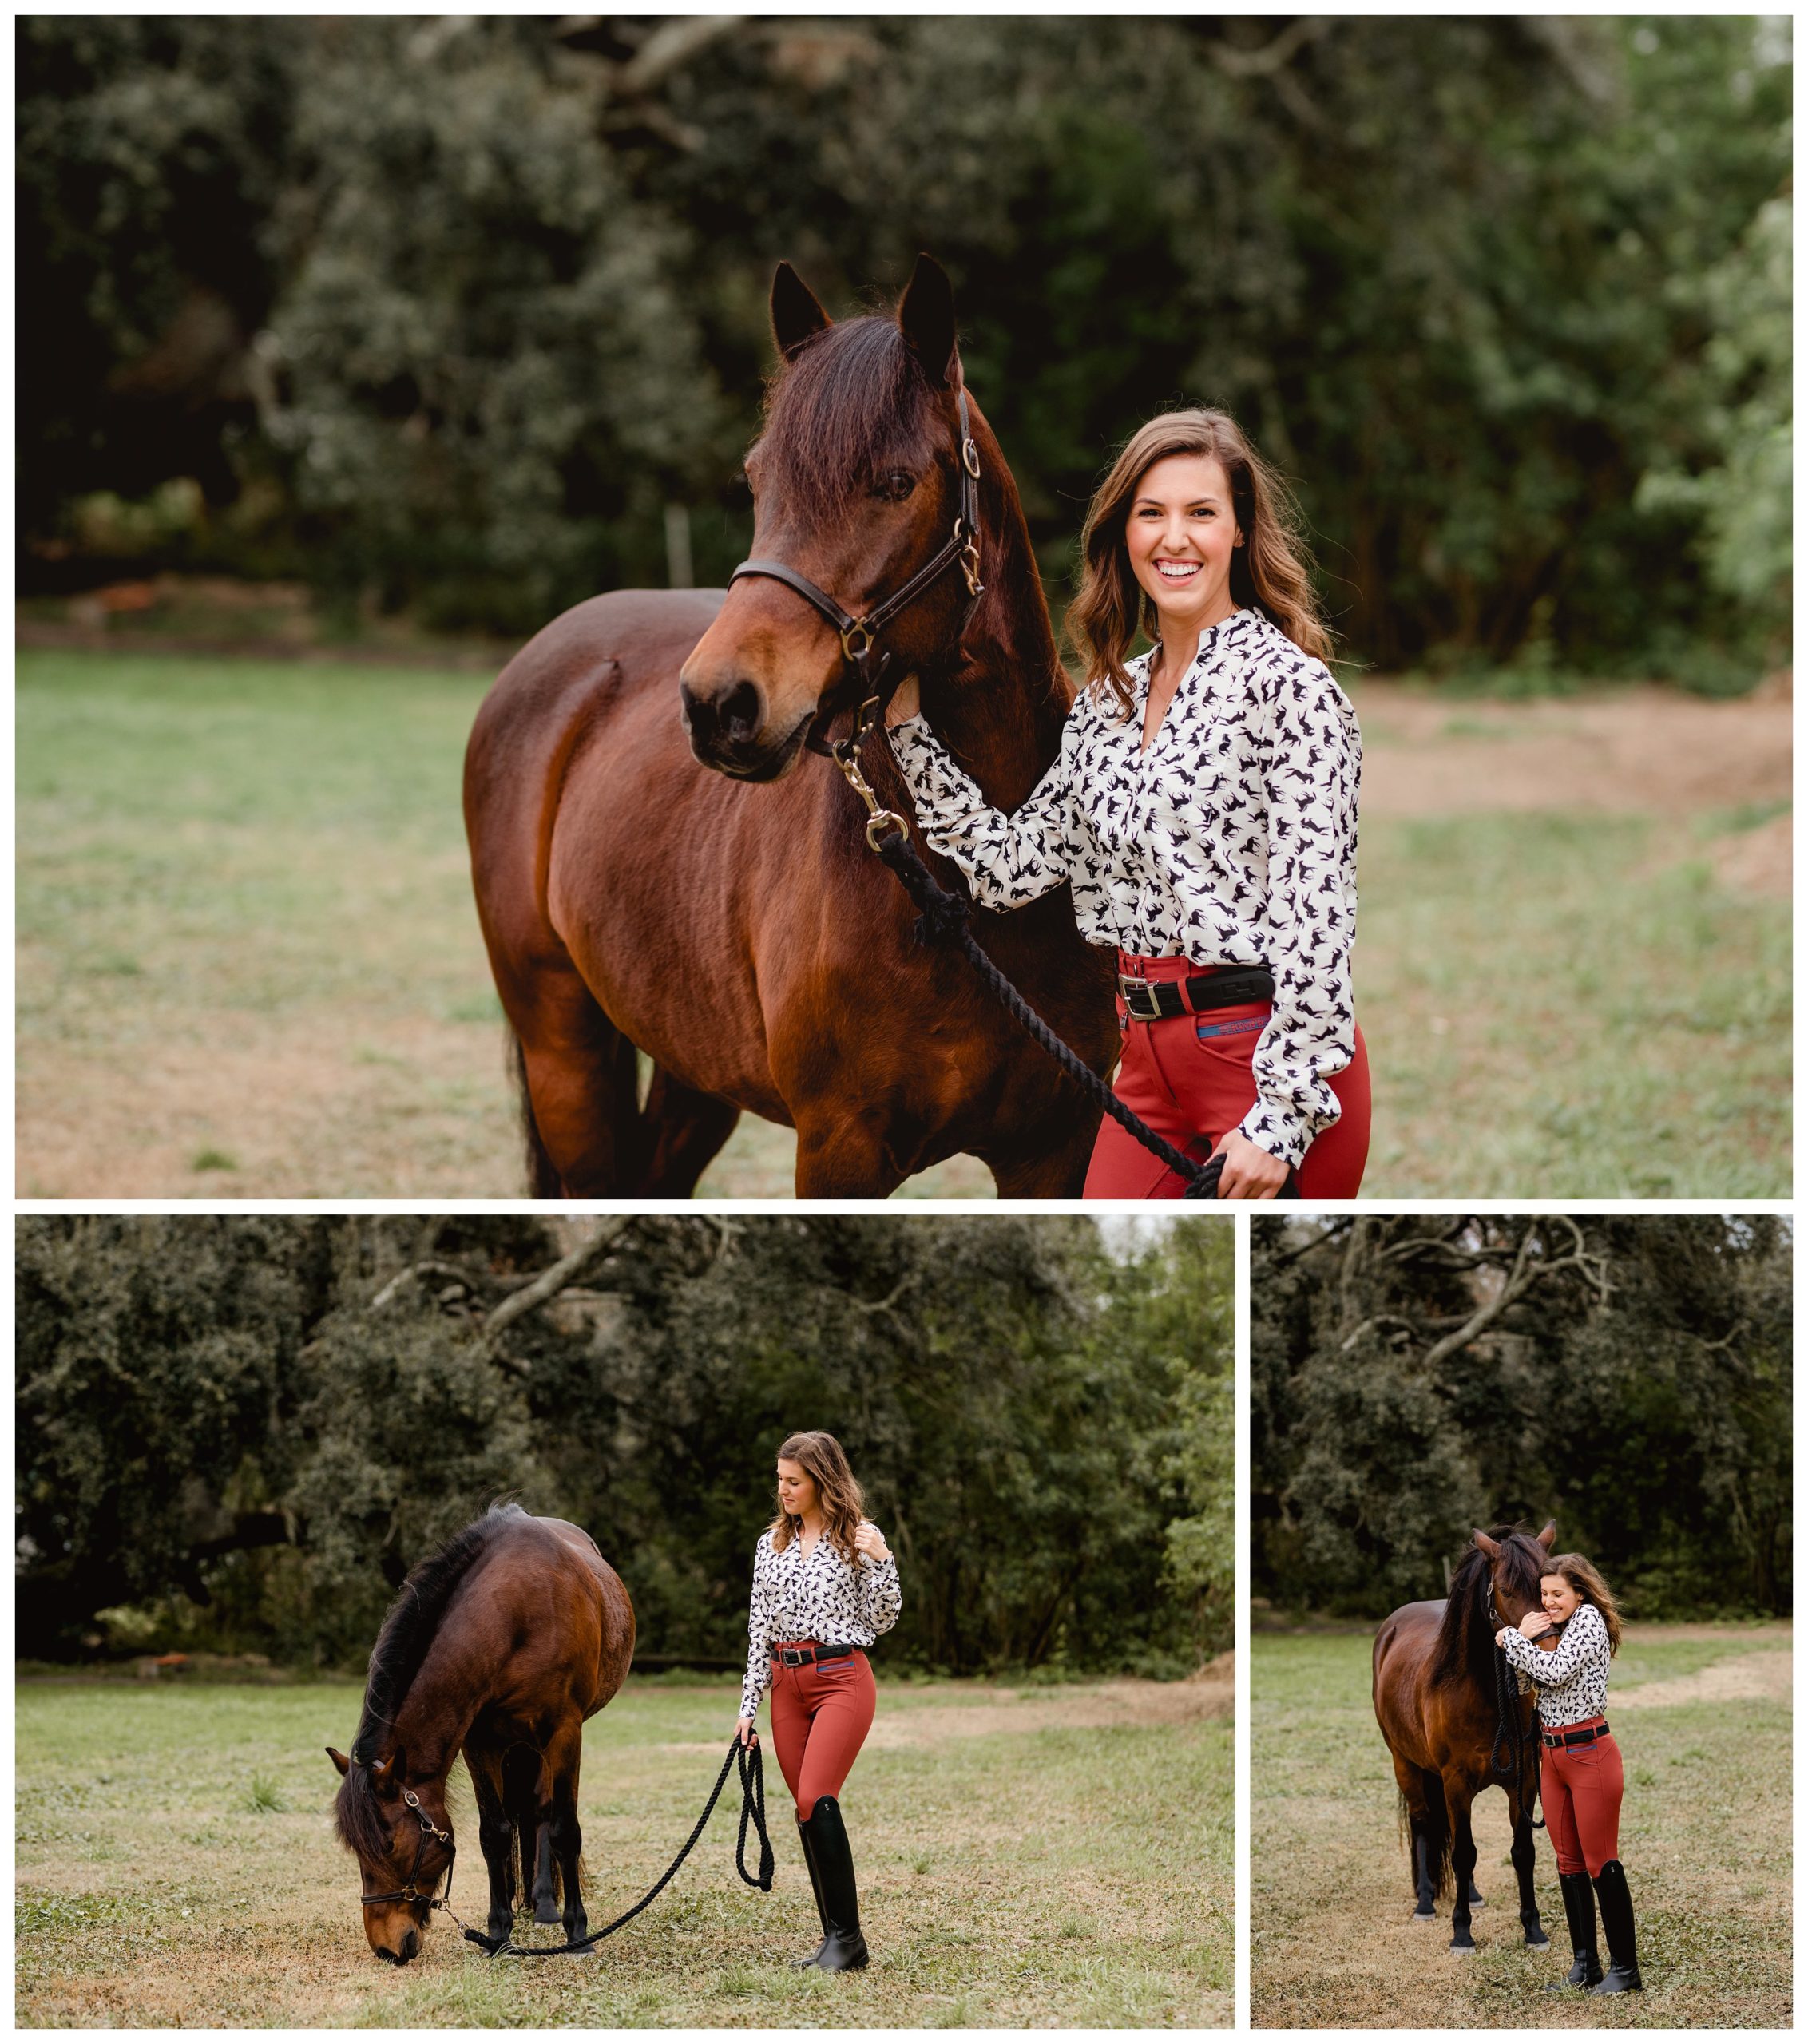 Florida equestrian blogger takes professional photo shoot with horse pictures using her dressage pony.